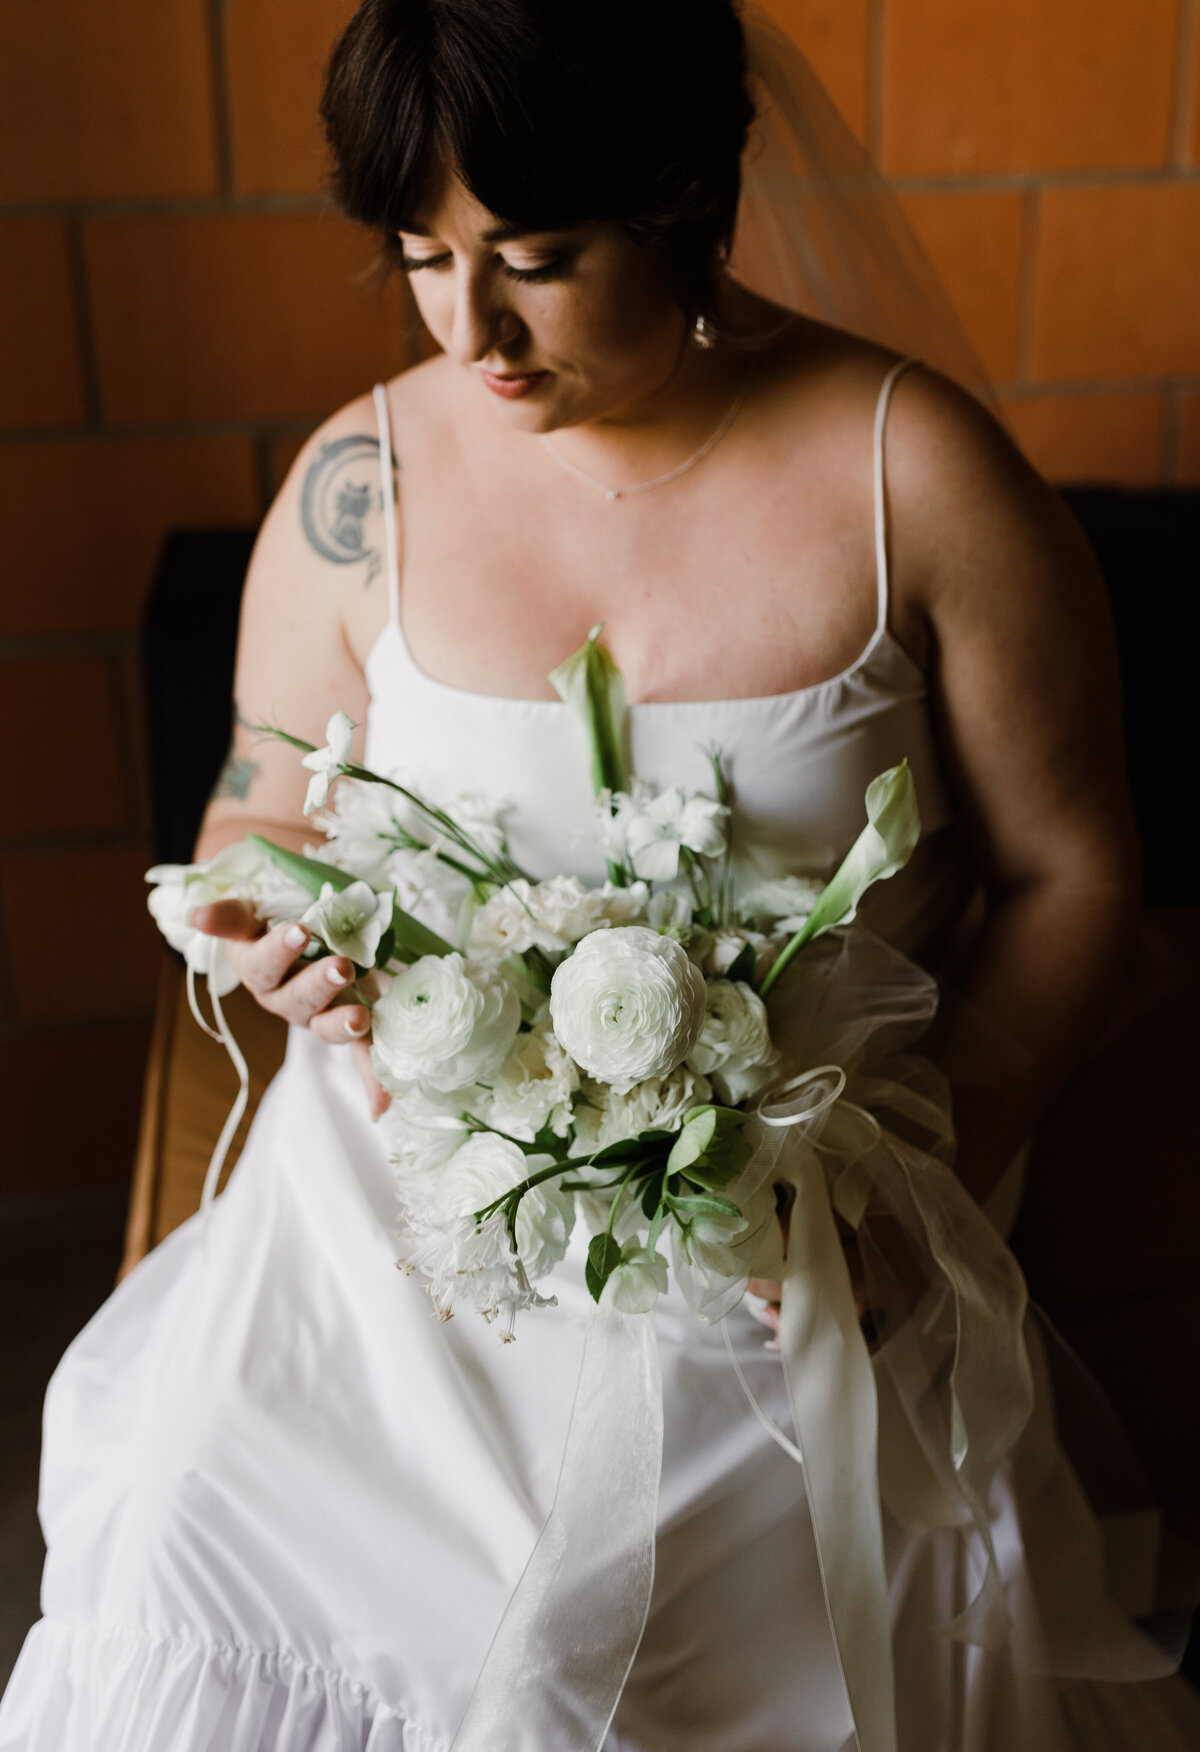 Bride sitting down holding bouquet of white flowers